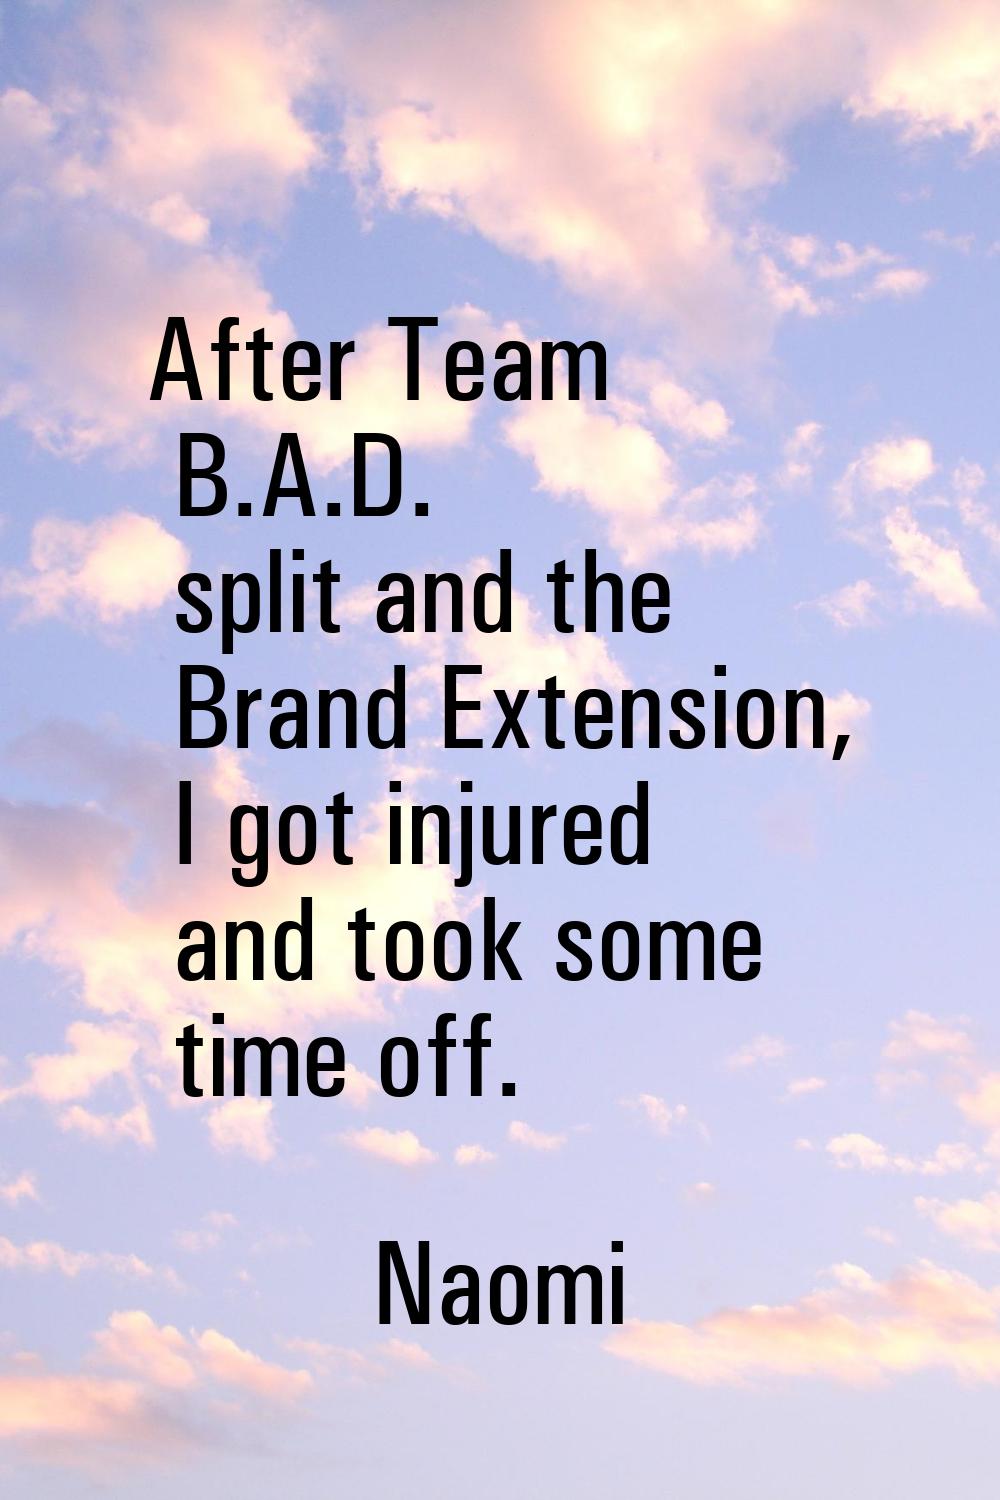 After Team B.A.D. split and the Brand Extension, I got injured and took some time off.